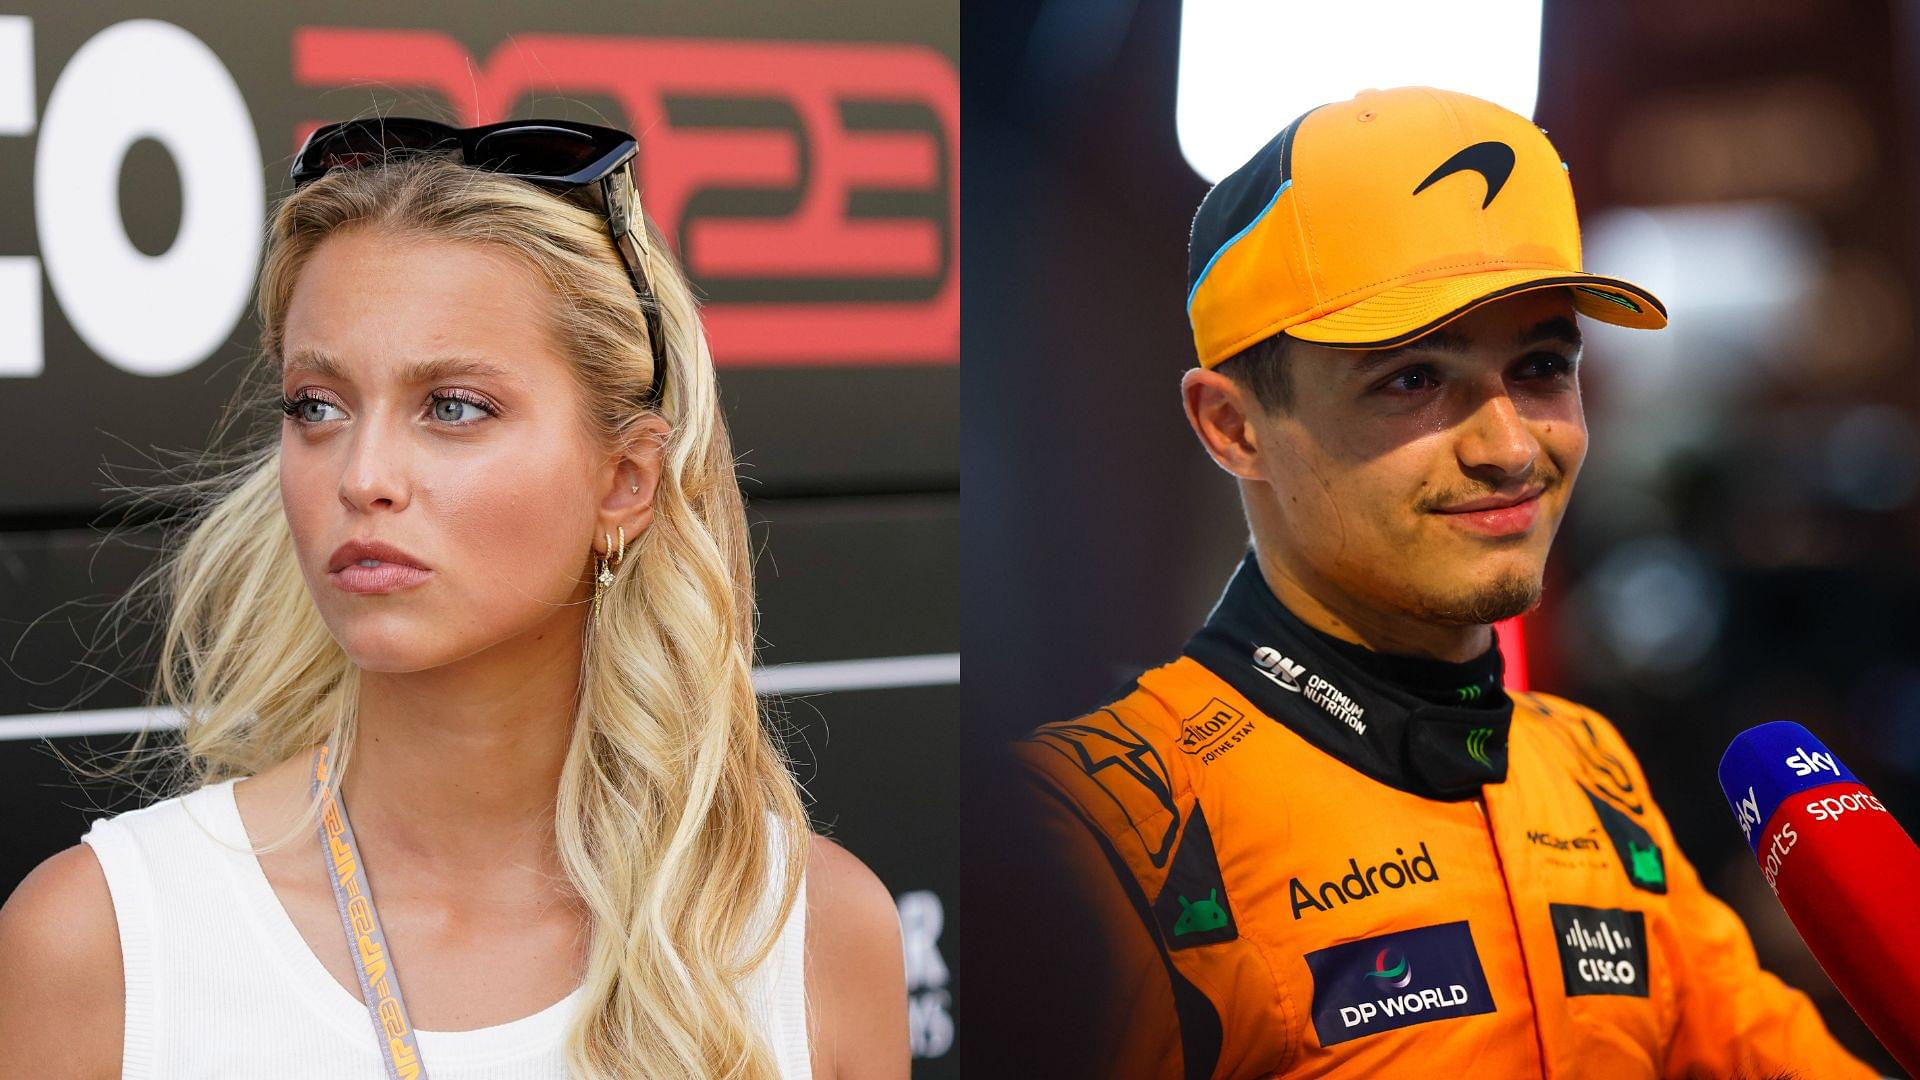 $727 Jacket Acts as a Major Clue in Confirming Lando Norris’ Date With Magui Corceiro in Monaco